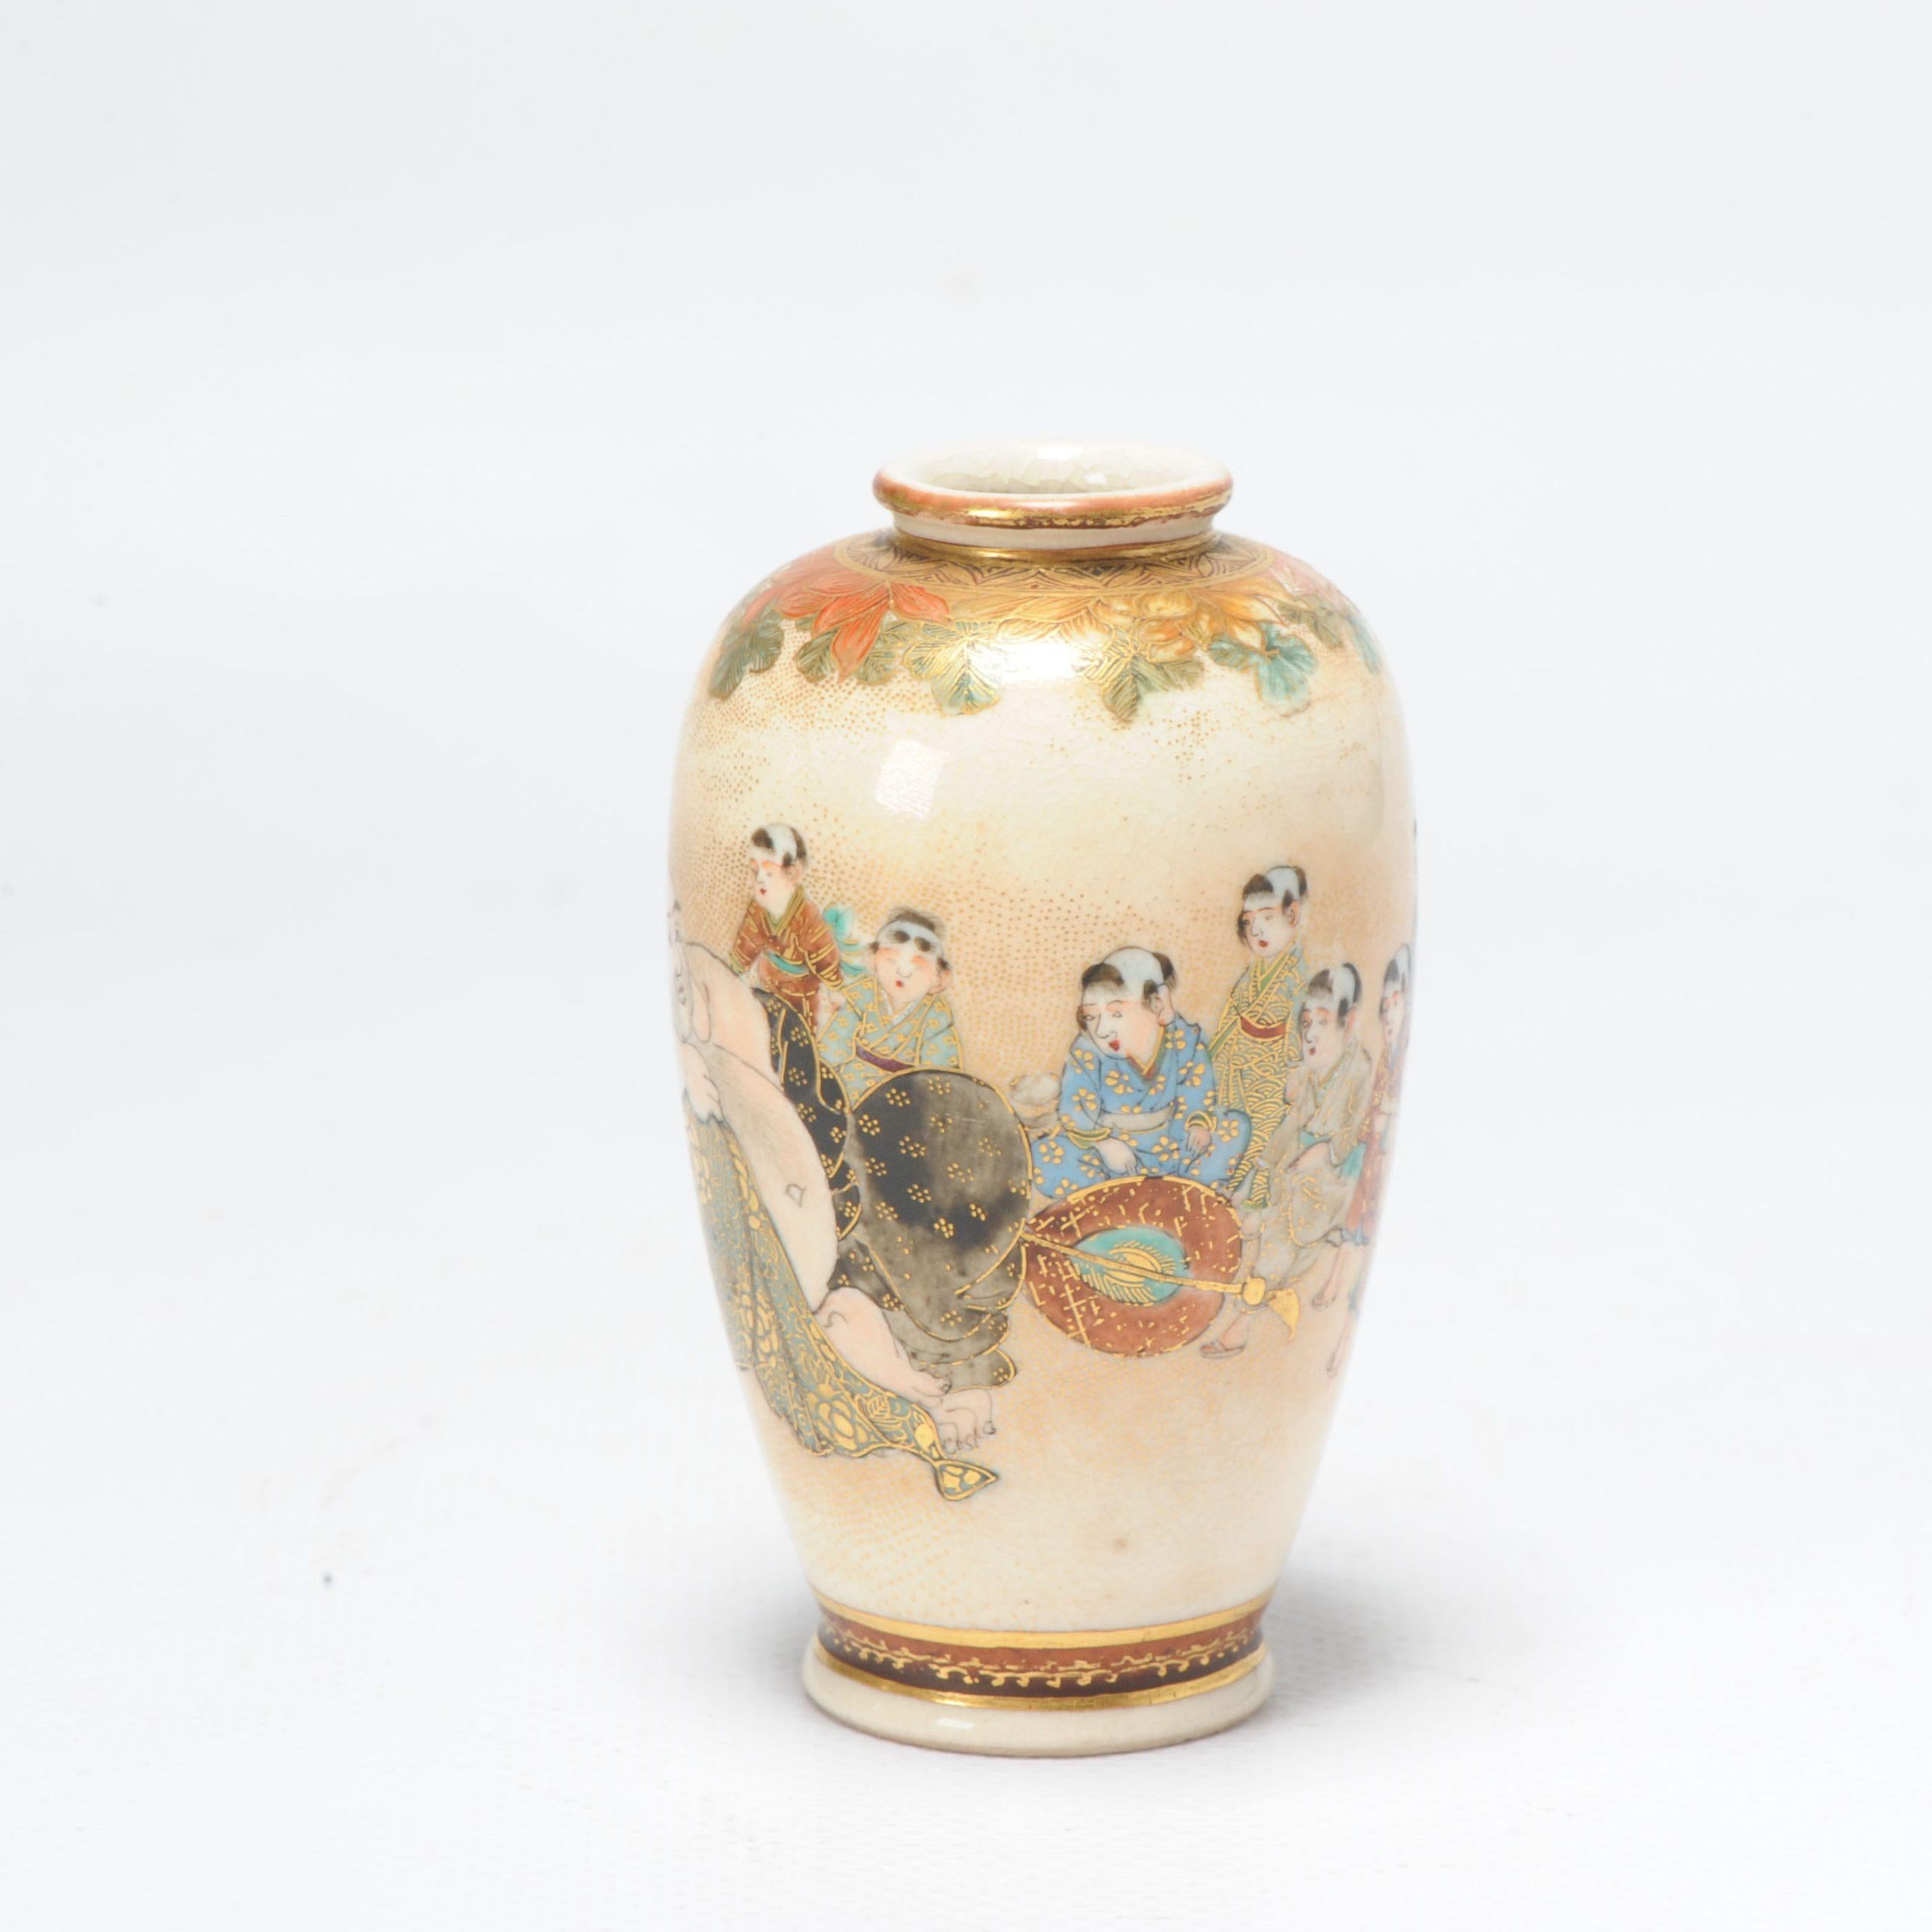 Ovoid vase depicting Hotei slumped against his sack in the company of several karako (Chinese boys), signed Dozan, 9cm (3½in) high;

Additional information:
Material: Porcelain & Pottery
Region of Origin: Japan
Period: 19th century Meiji Periode